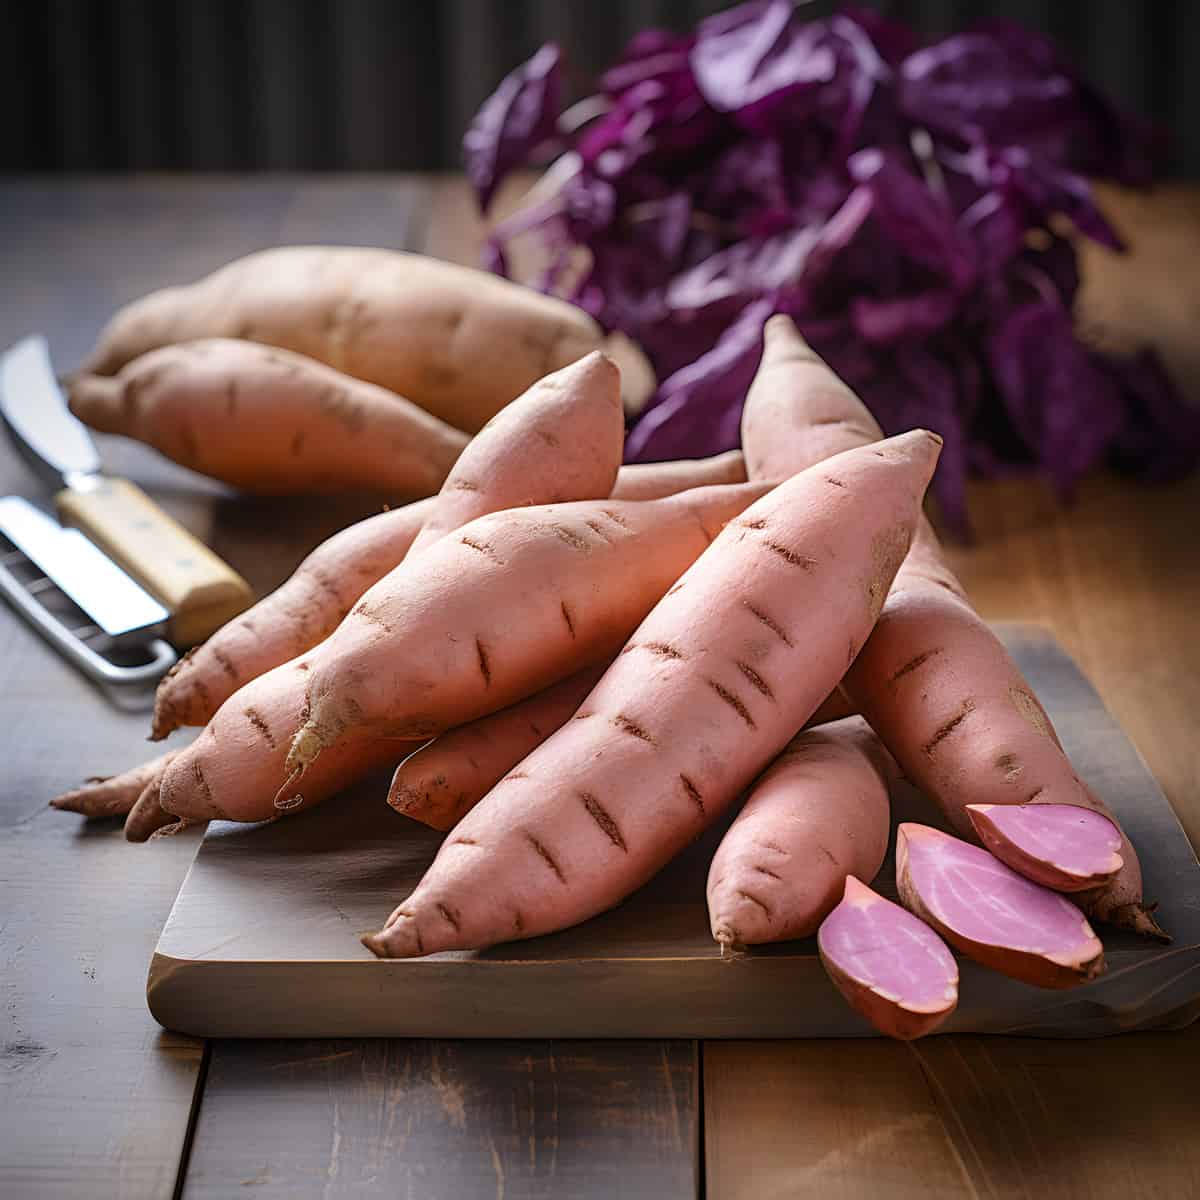 Northern Star Sweet Potatoes on a kitchen counter